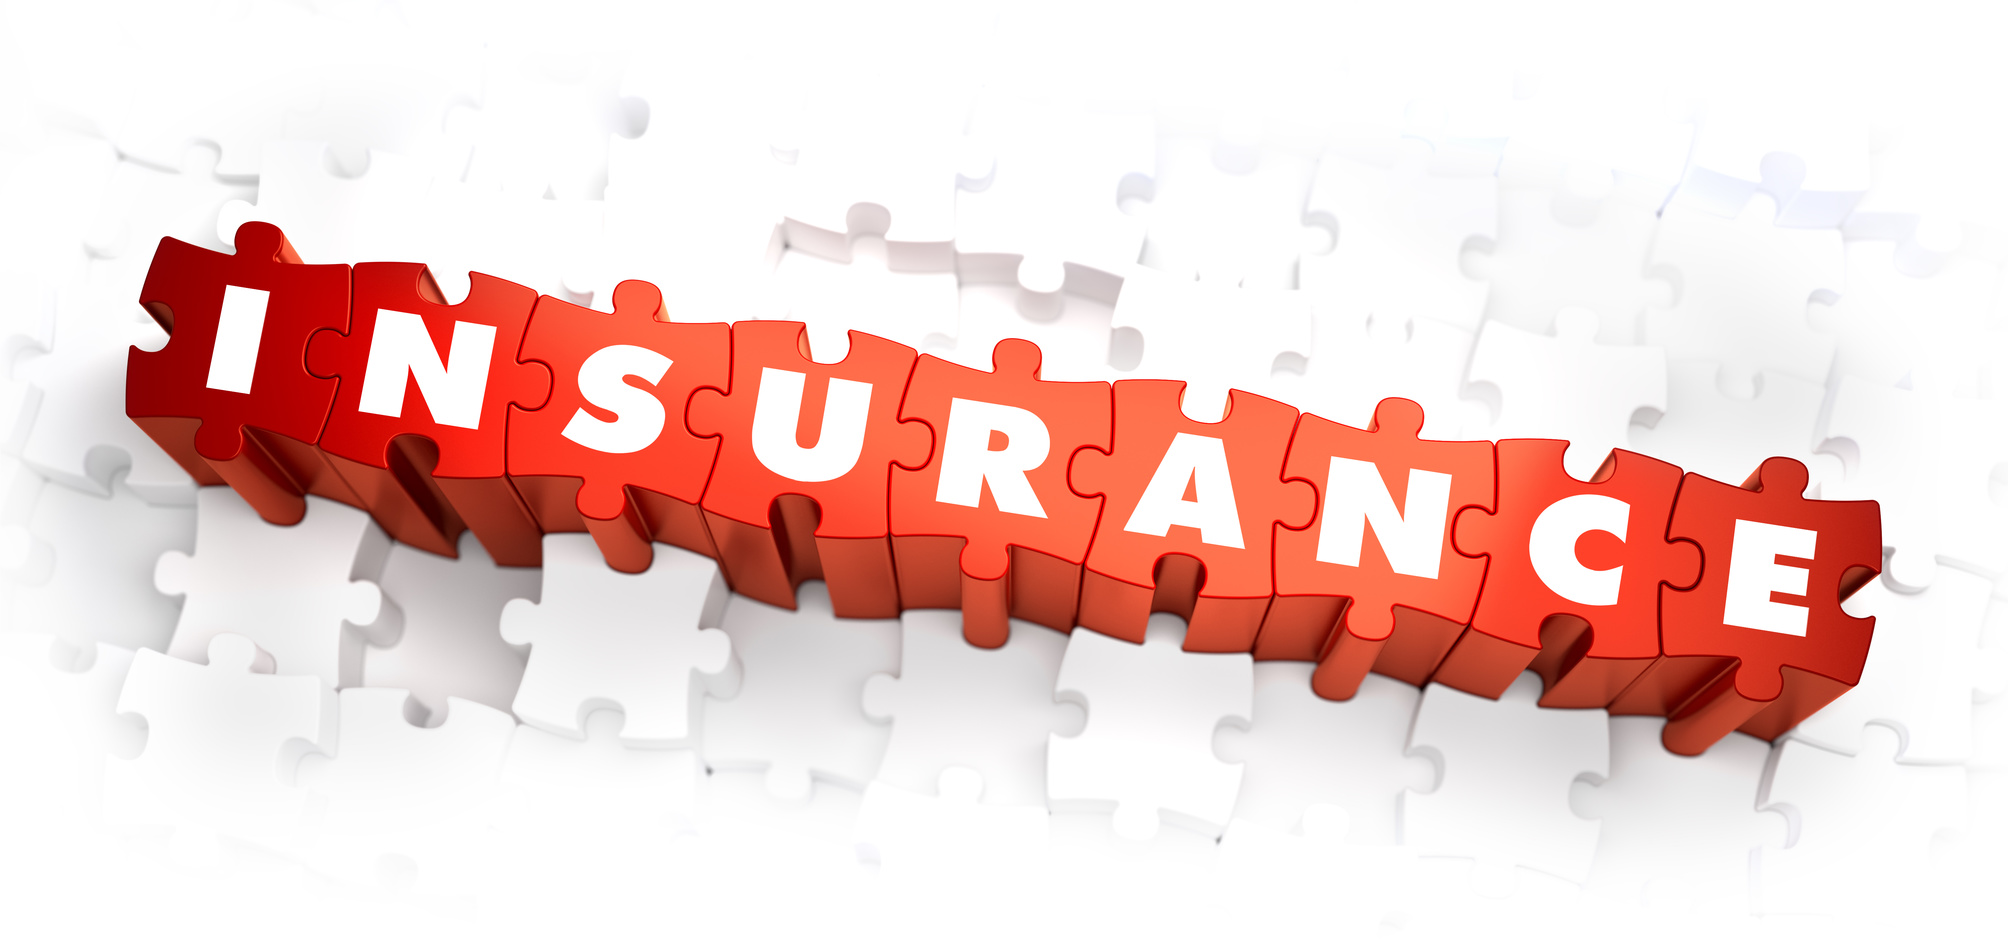 Insurance is a notoriously difficult service to sell